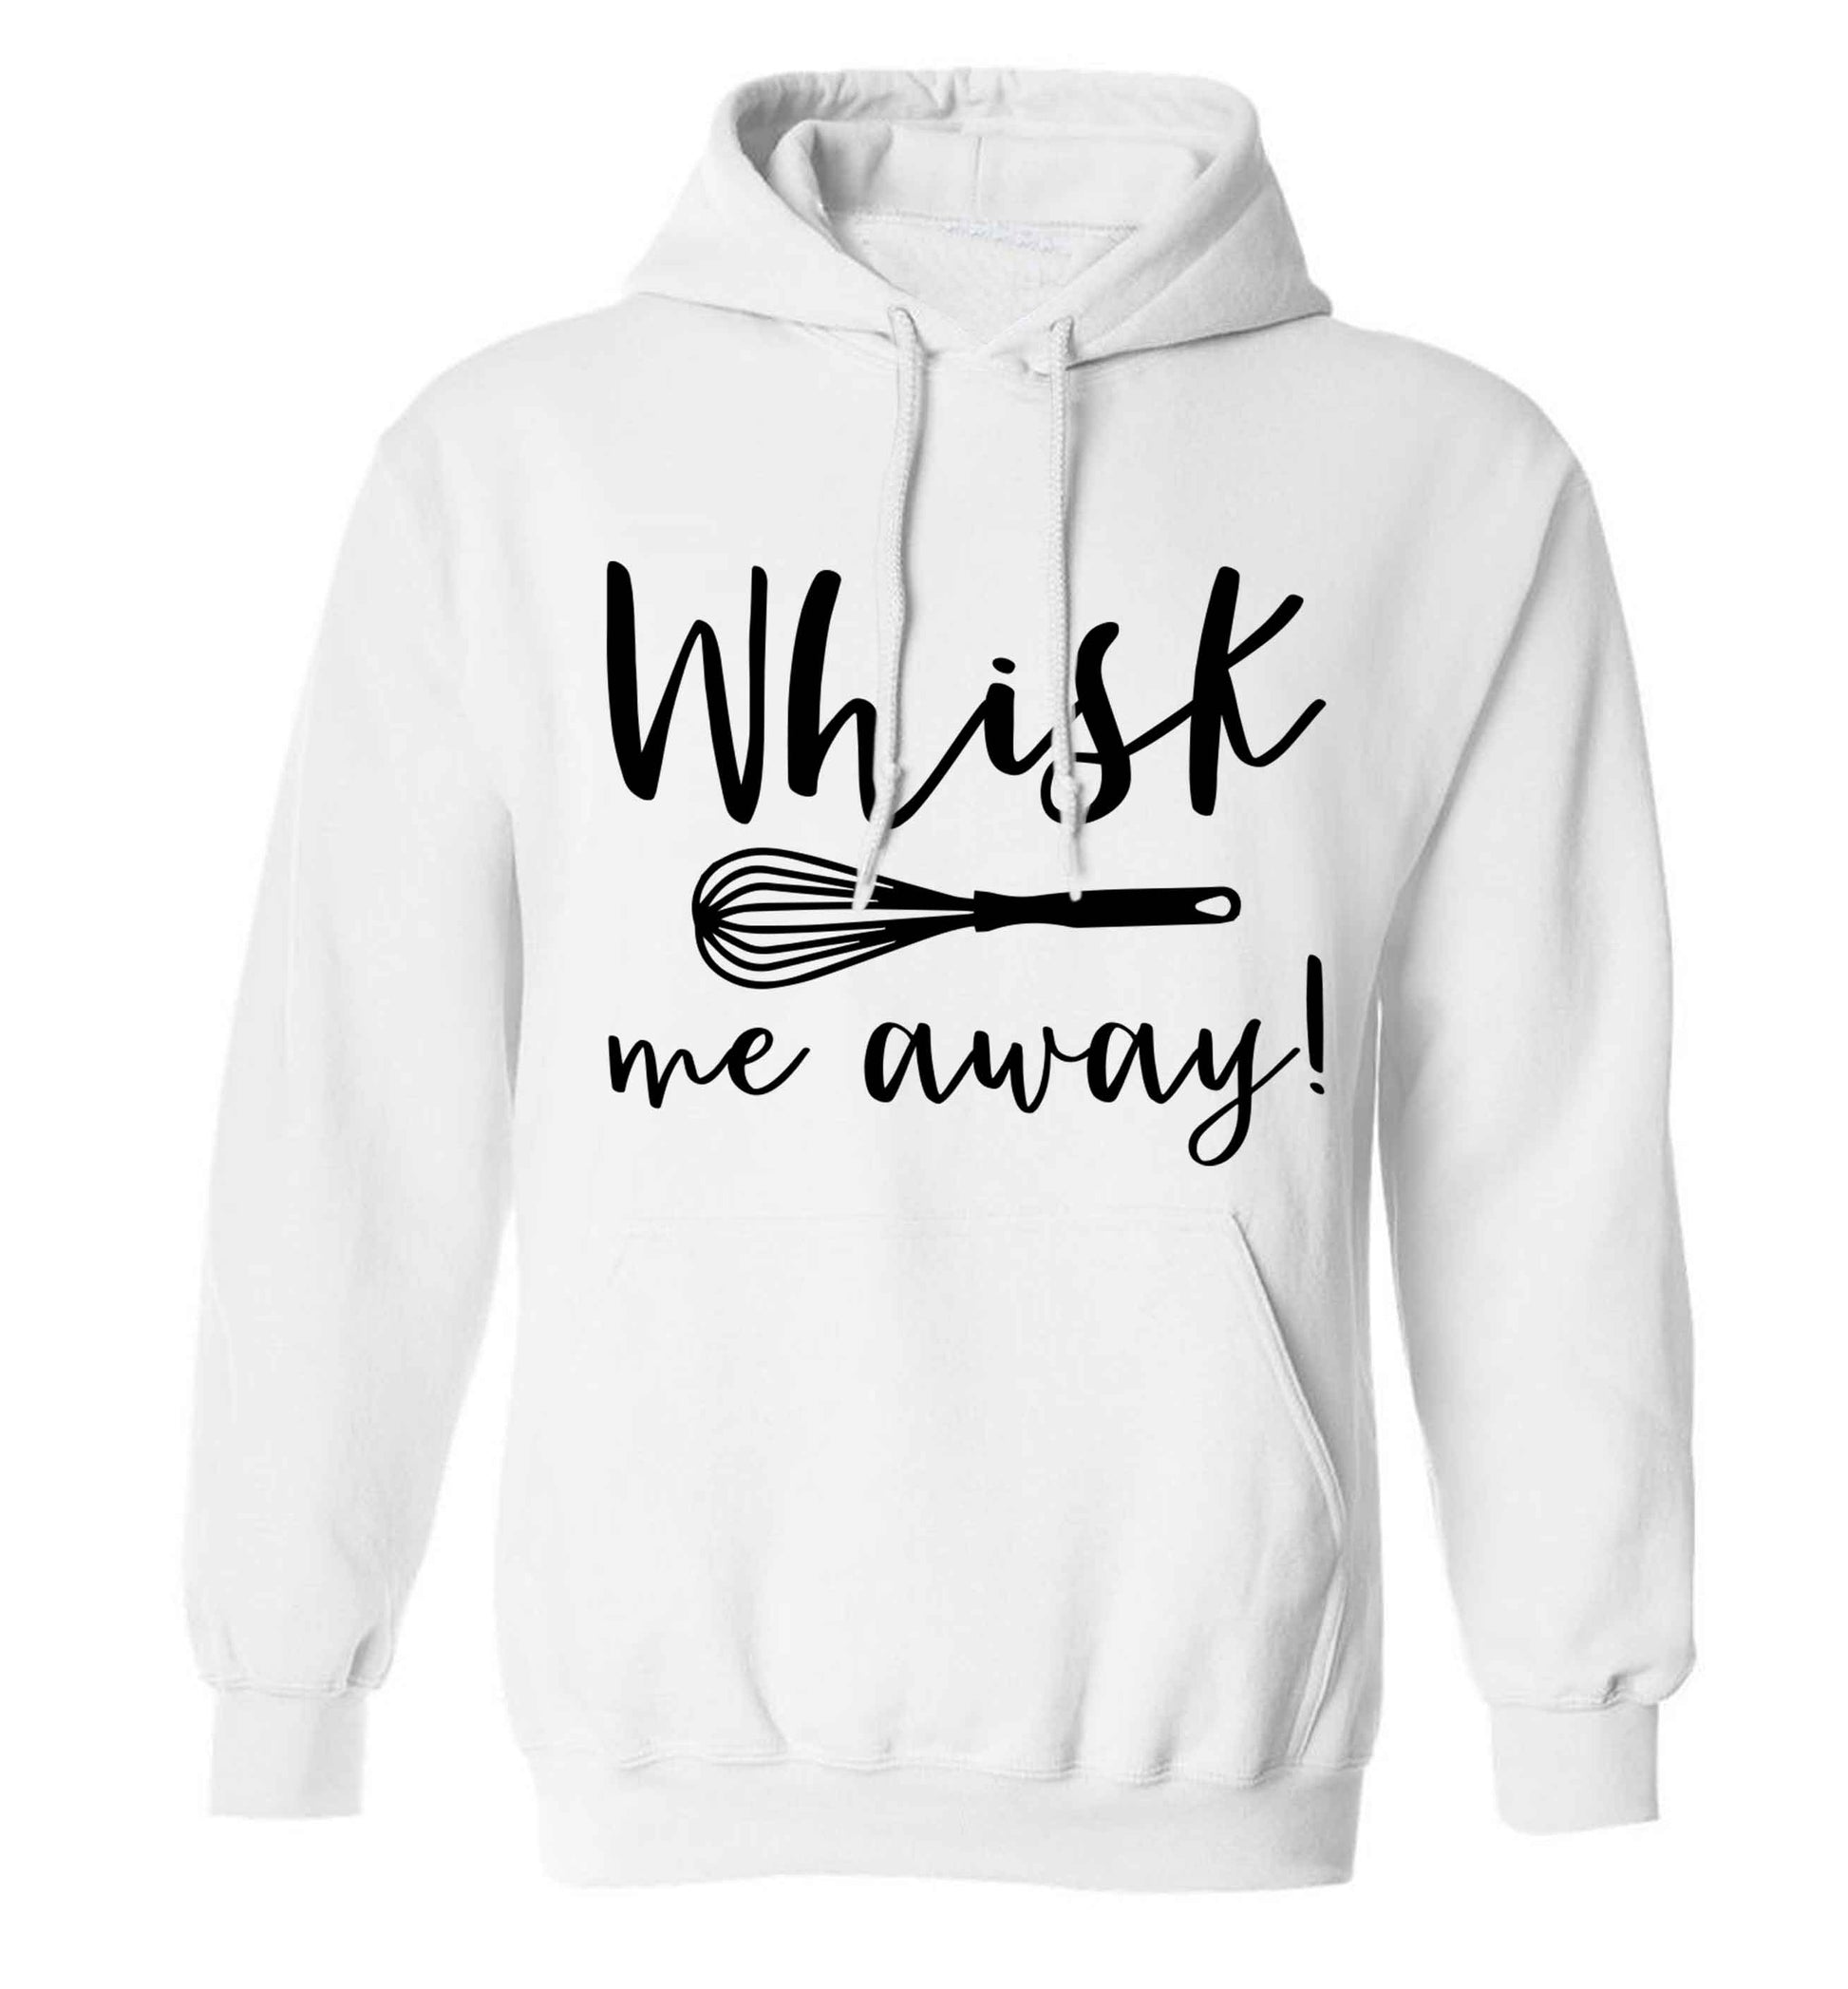 Whisk me away adults unisex white hoodie 2XL